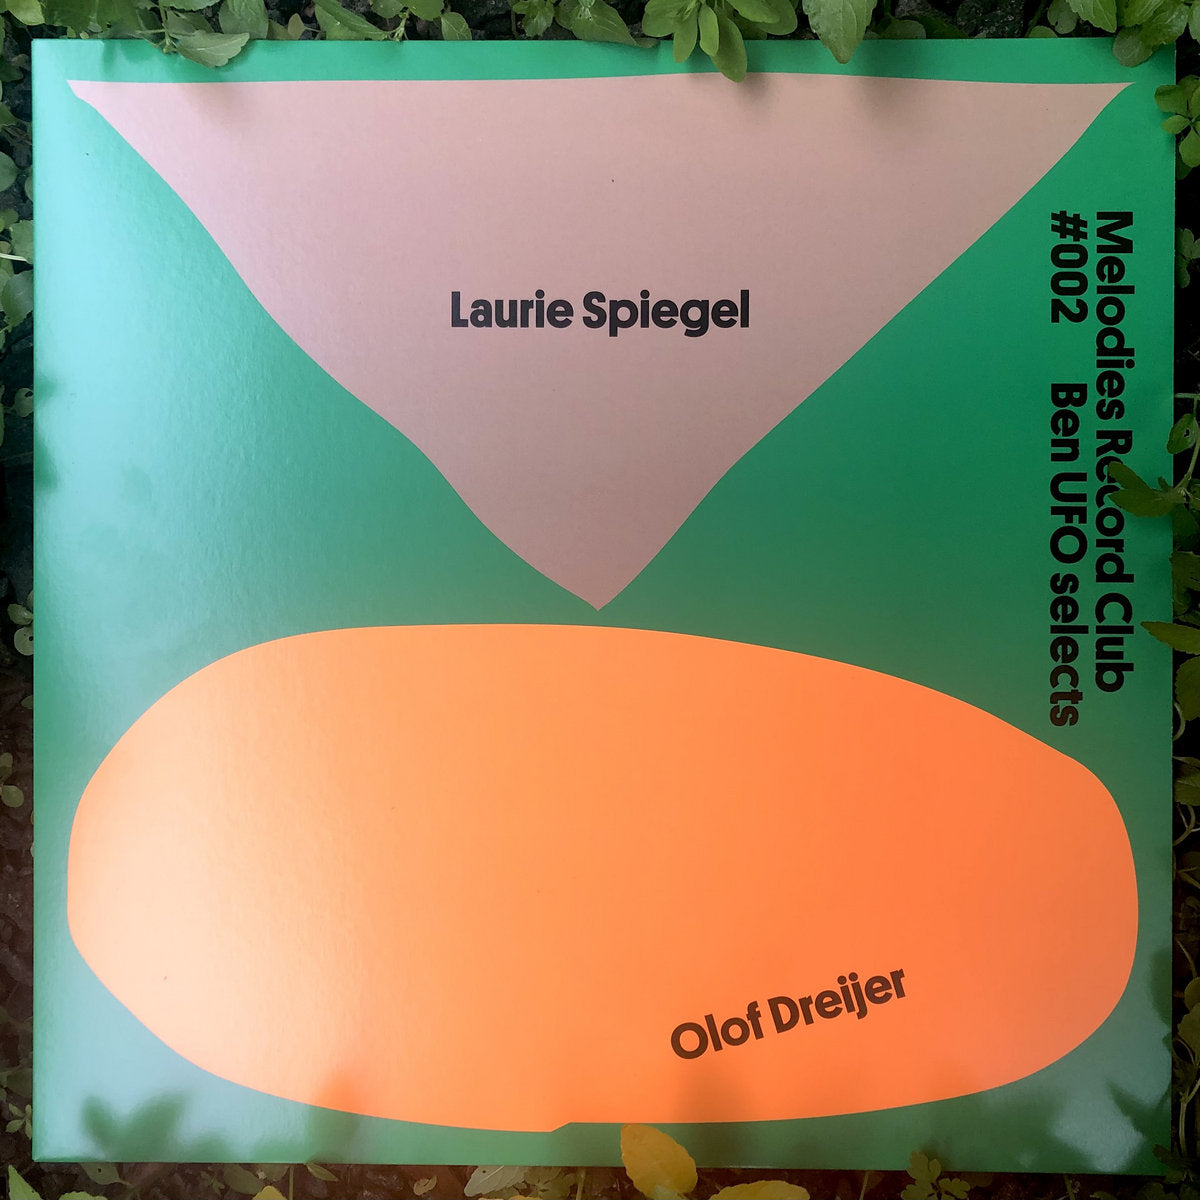 Ben UFO Selects Laurie Spiegel / Olof Dreijer – Melodies Record Club 002 - New 12" Single Record 2021 Melodies International UK Vinyl - Electronic / Minimal / New Age / House / Experimental